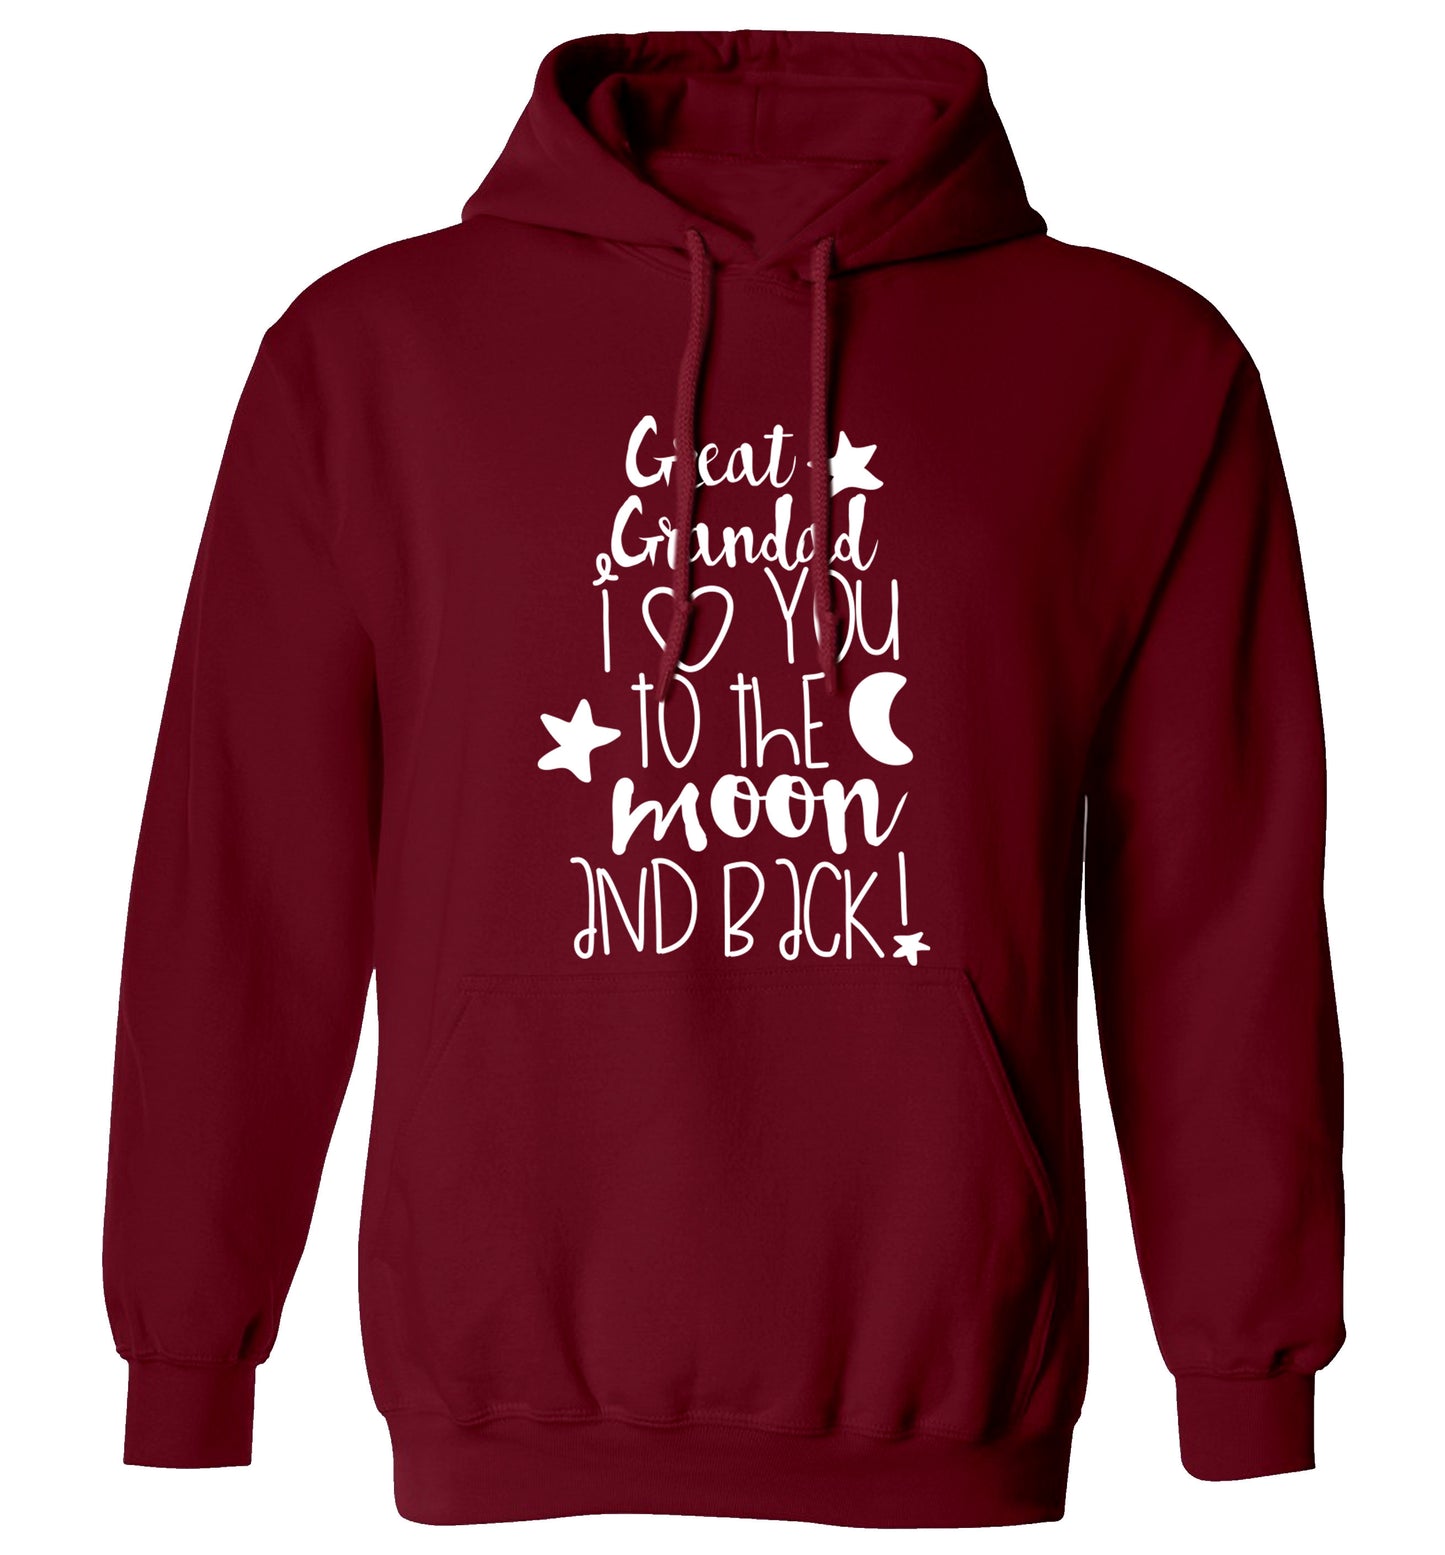 Great Grandad I love you to the moon and back adults unisex maroon hoodie 2XL